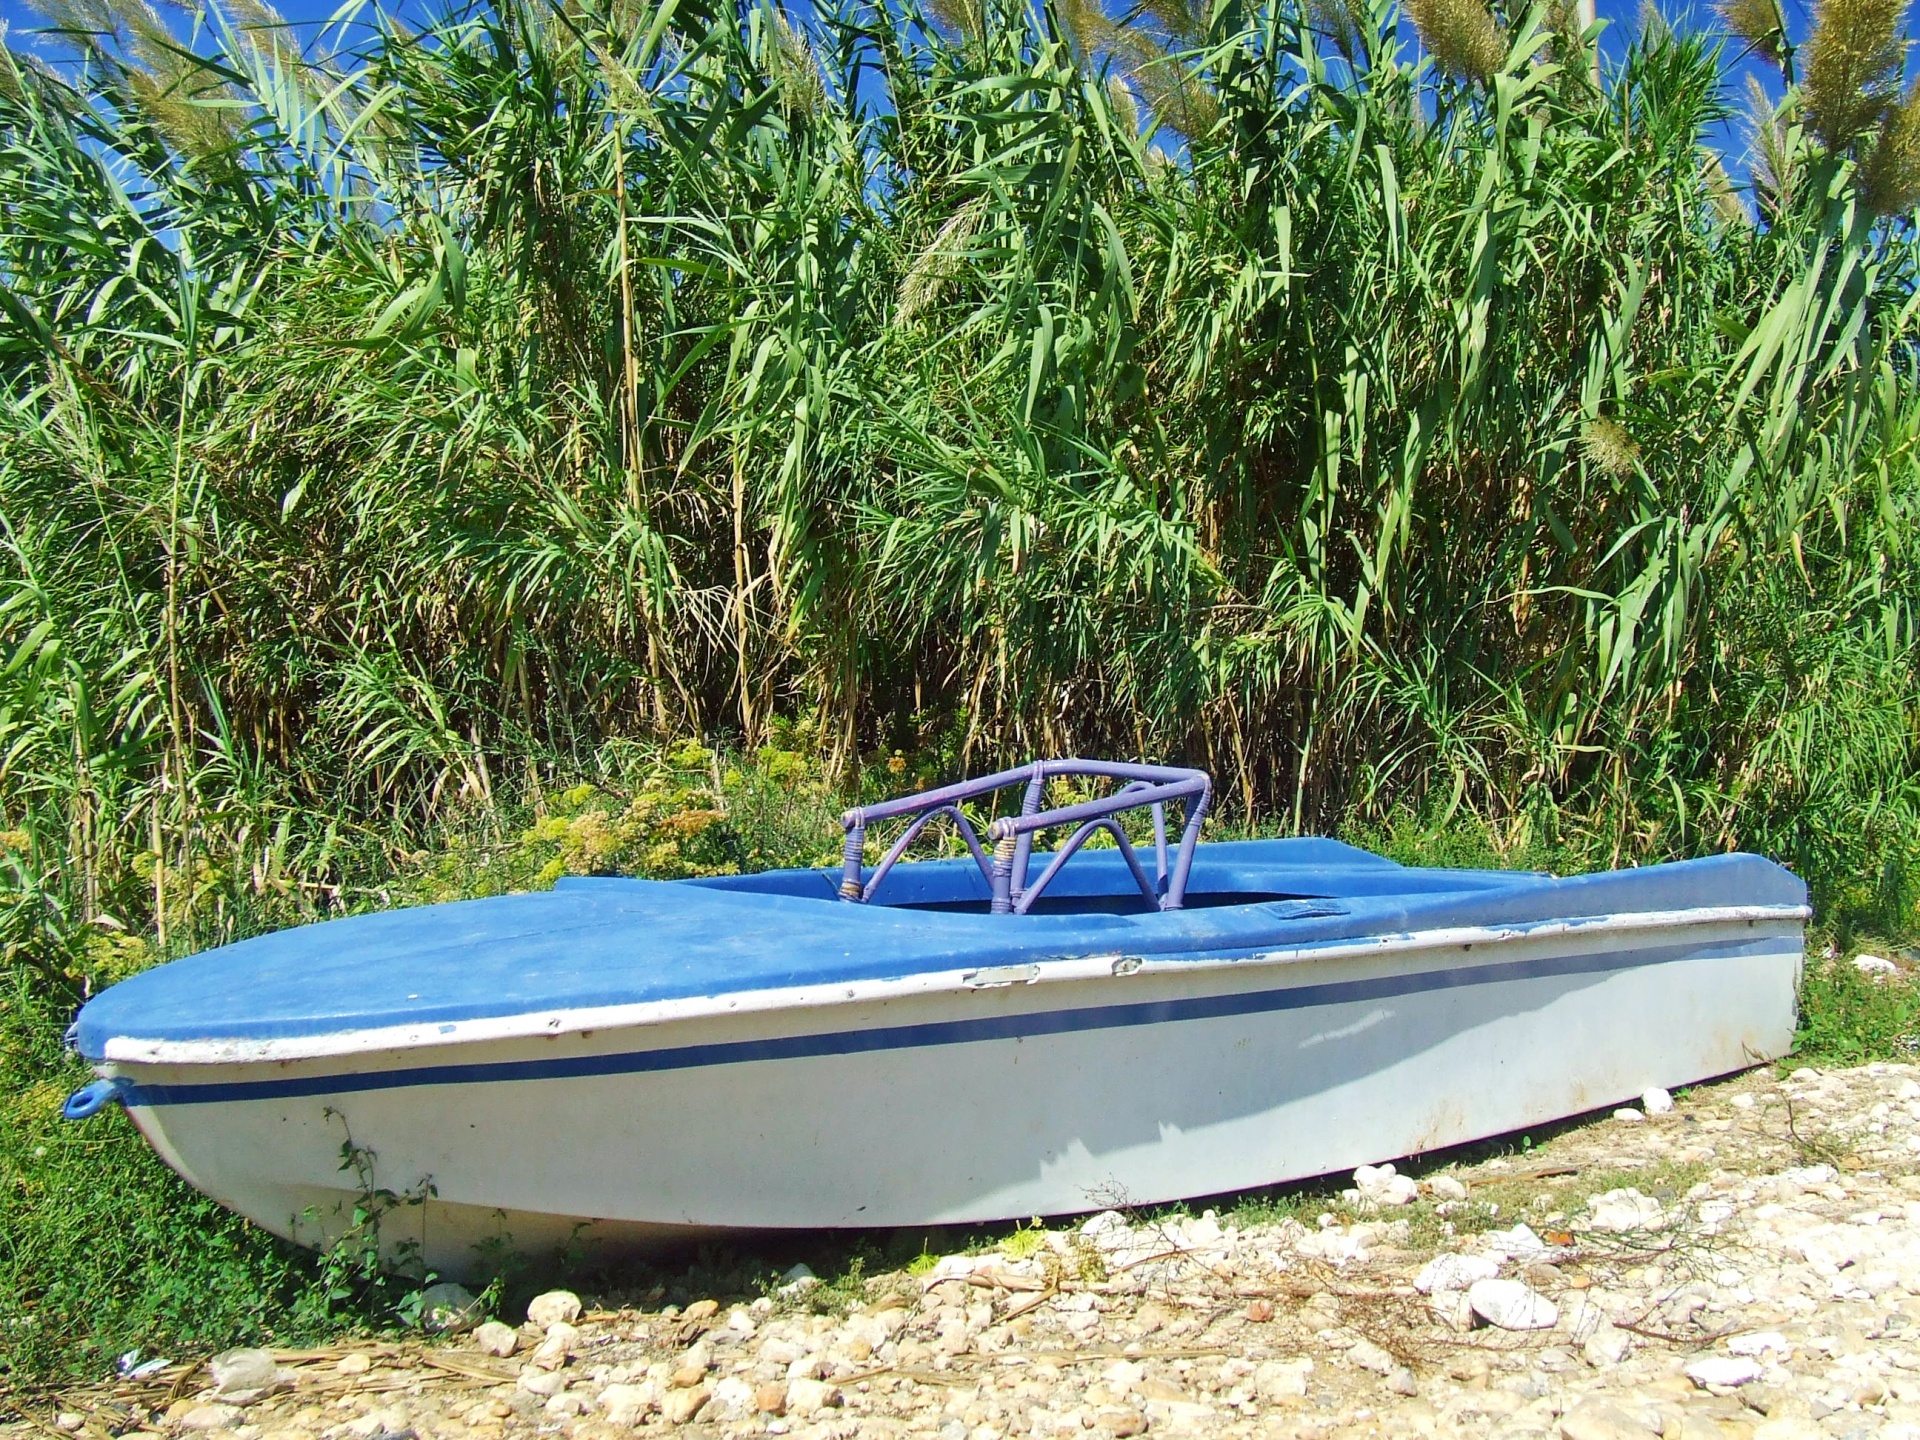 An old blue rowing boat, beached in front of a clump of wild bamboo